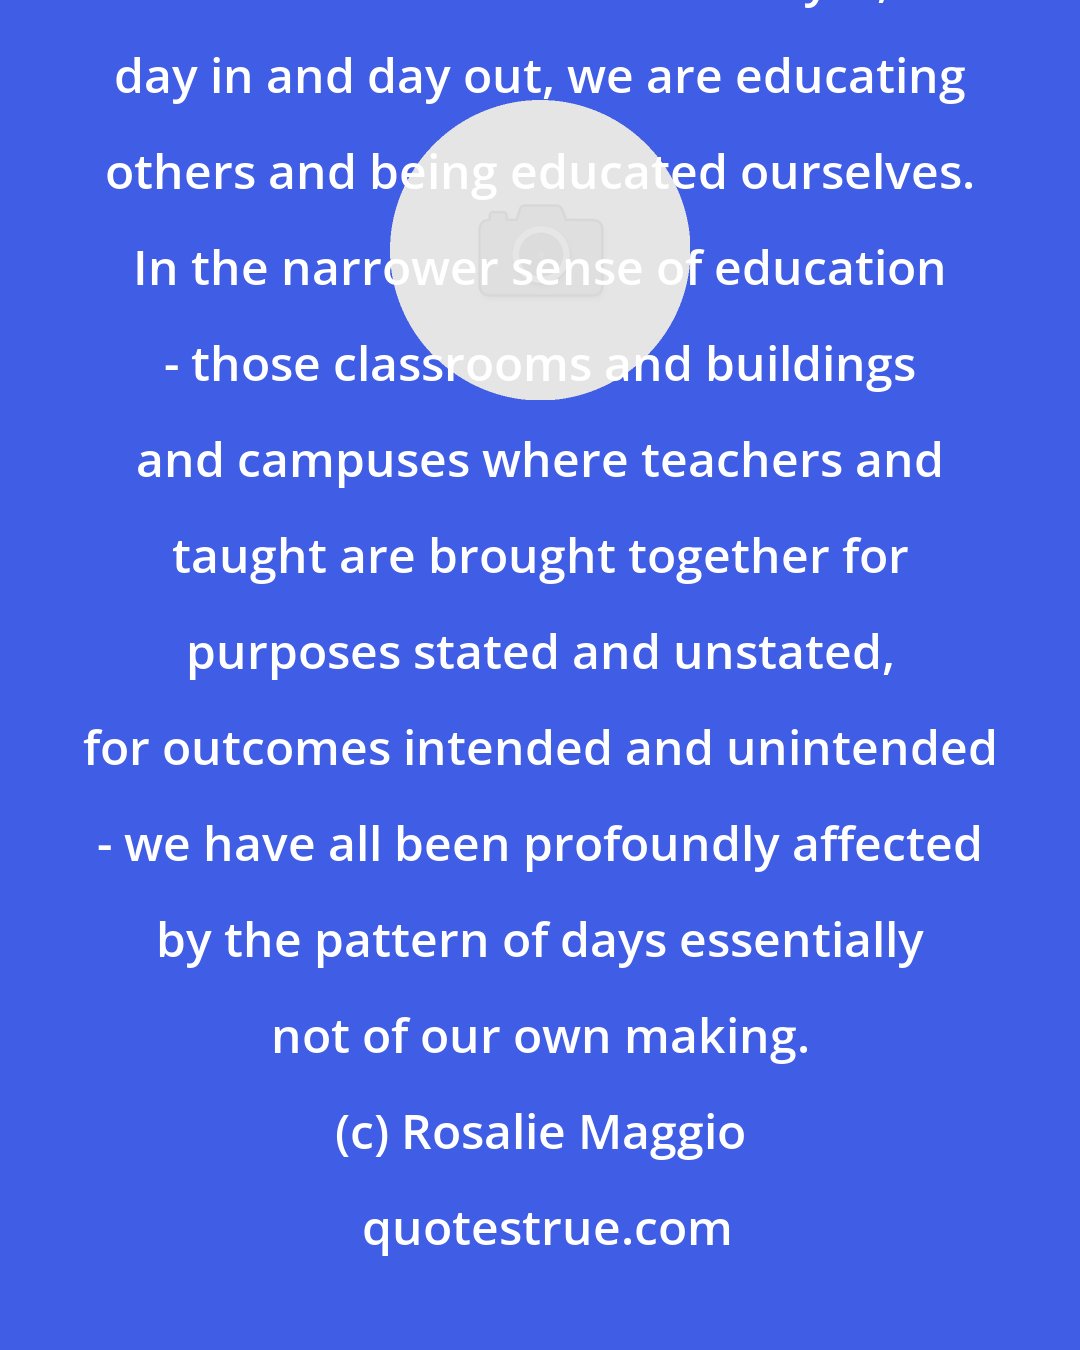 Rosalie Maggio: We can go for days, weeks, and even months without saying or thinking the word 'education.' And yet, day in and day out, we are educating others and being educated ourselves. In the narrower sense of education - those classrooms and buildings and campuses where teachers and taught are brought together for purposes stated and unstated, for outcomes intended and unintended - we have all been profoundly affected by the pattern of days essentially not of our own making.